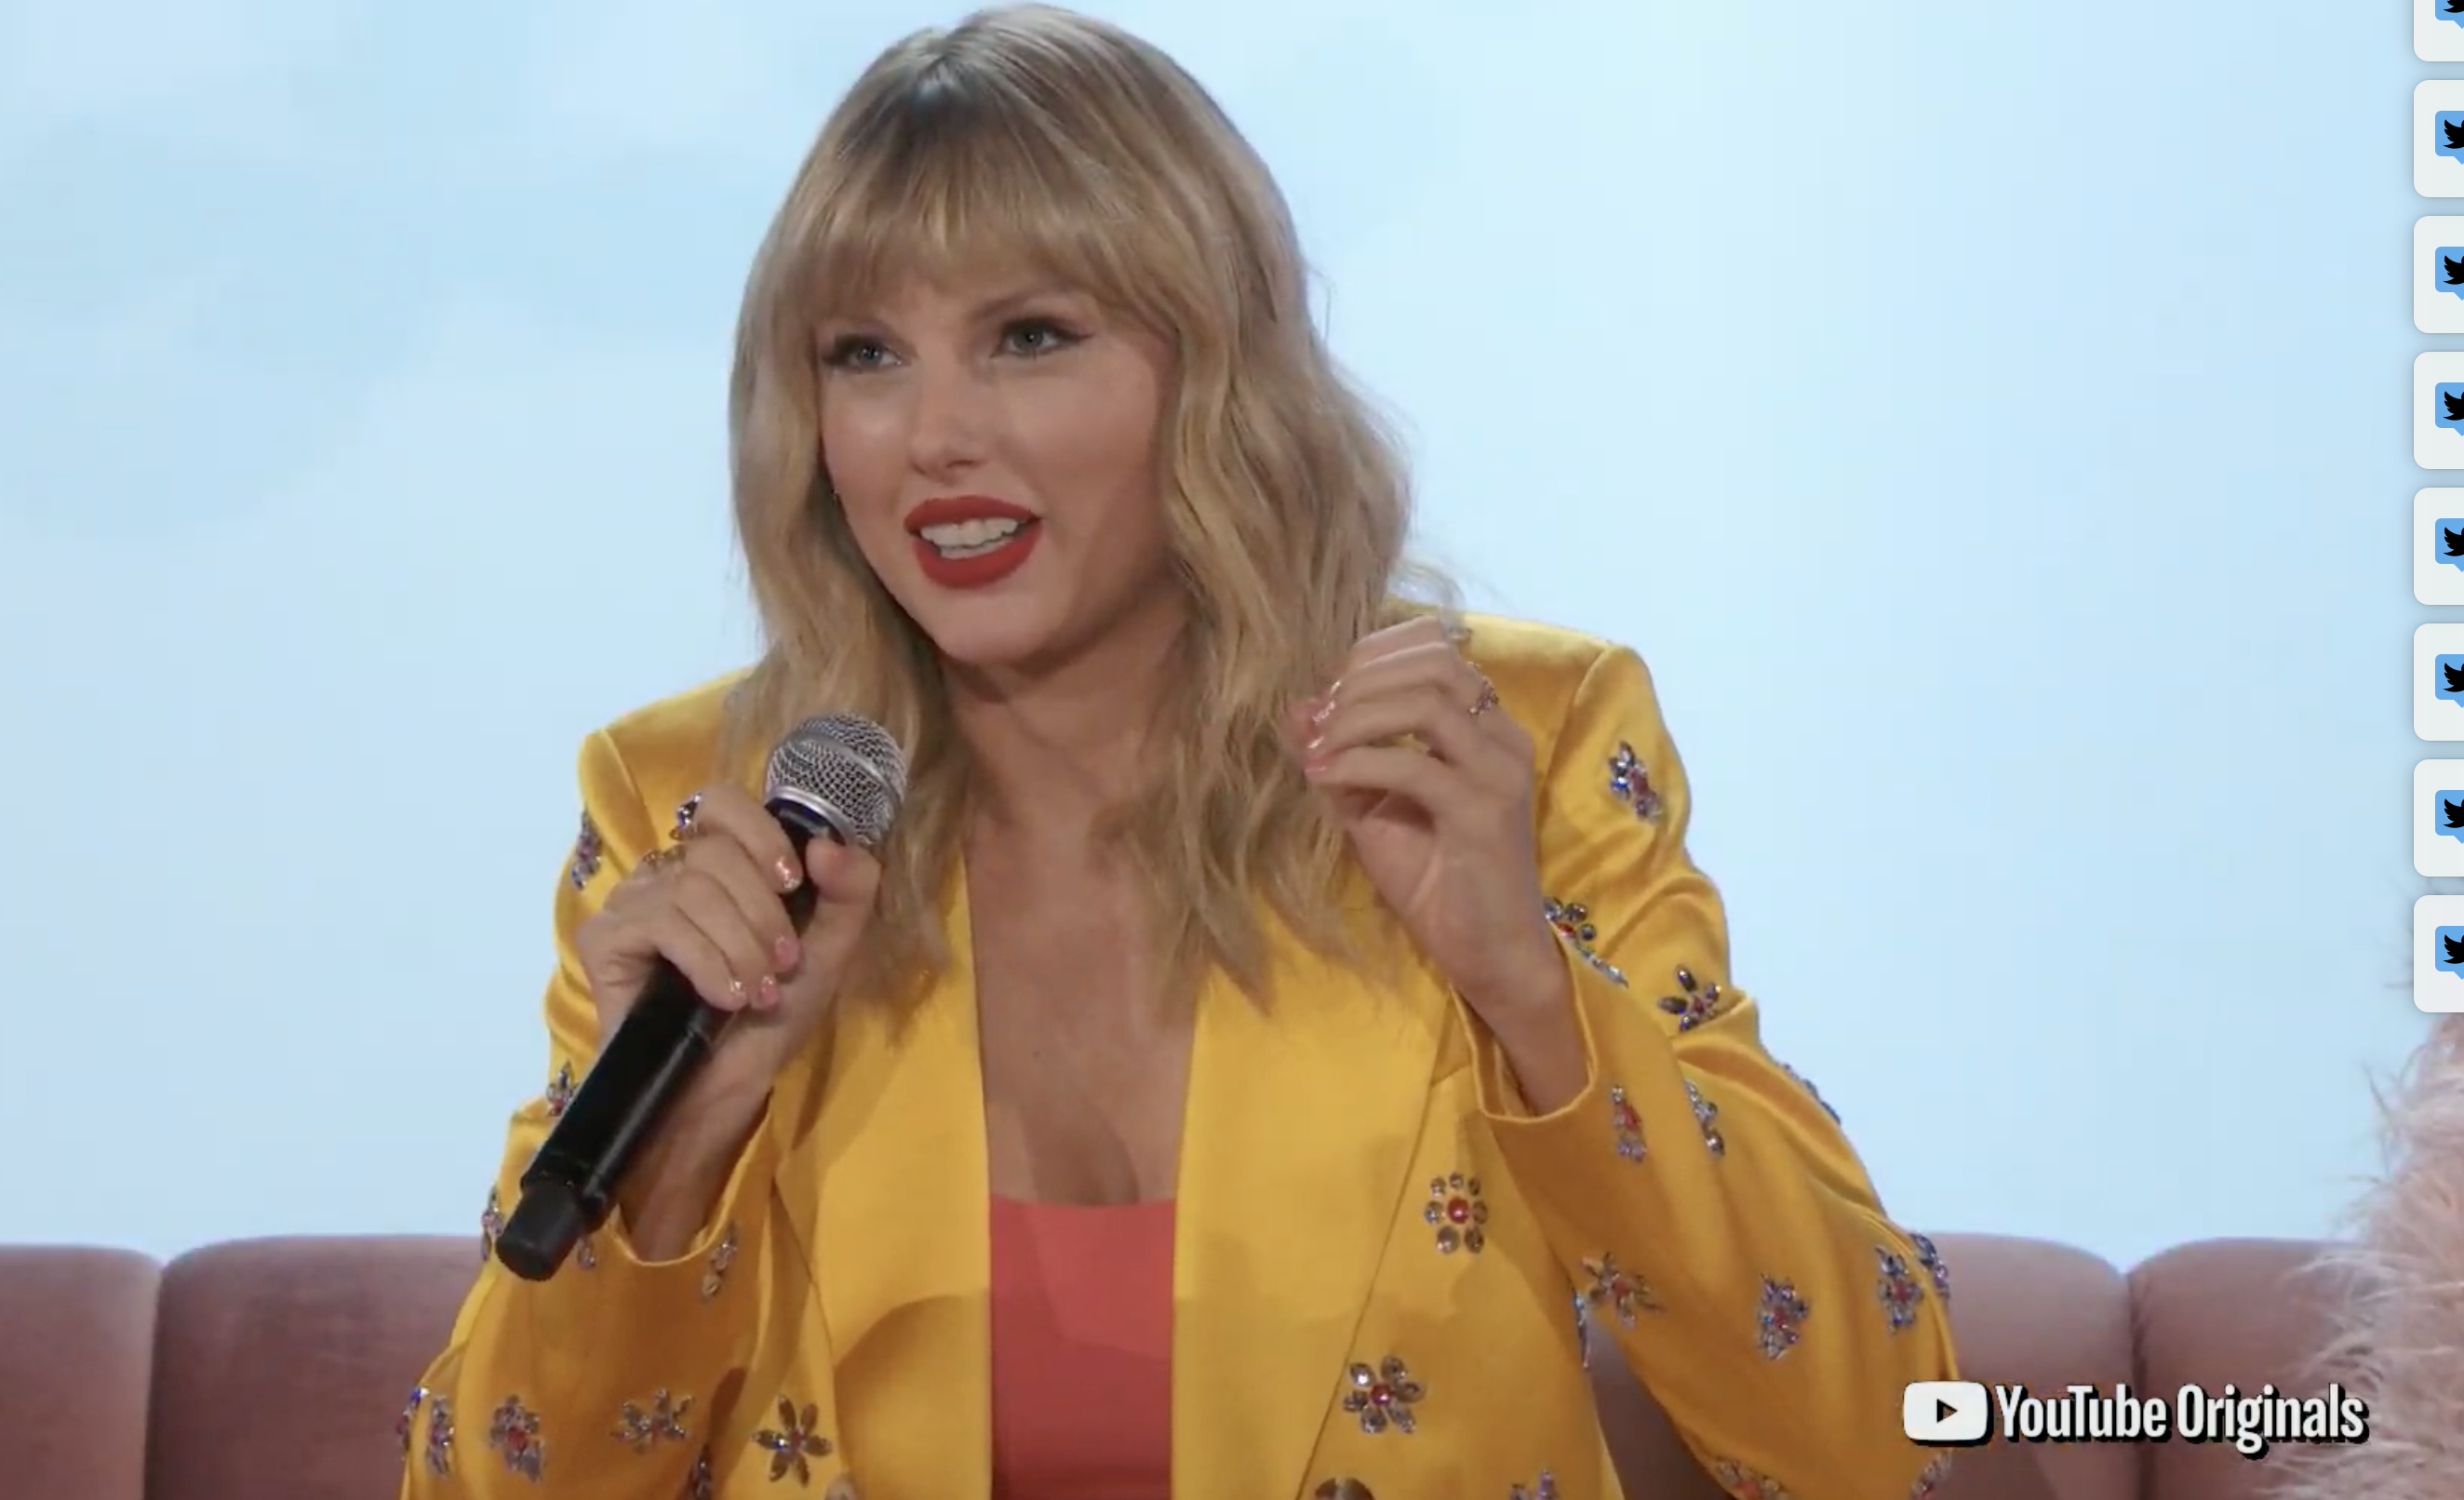 What Taylor Said During Her 'Lover' YouTube Live About Album and Fashion